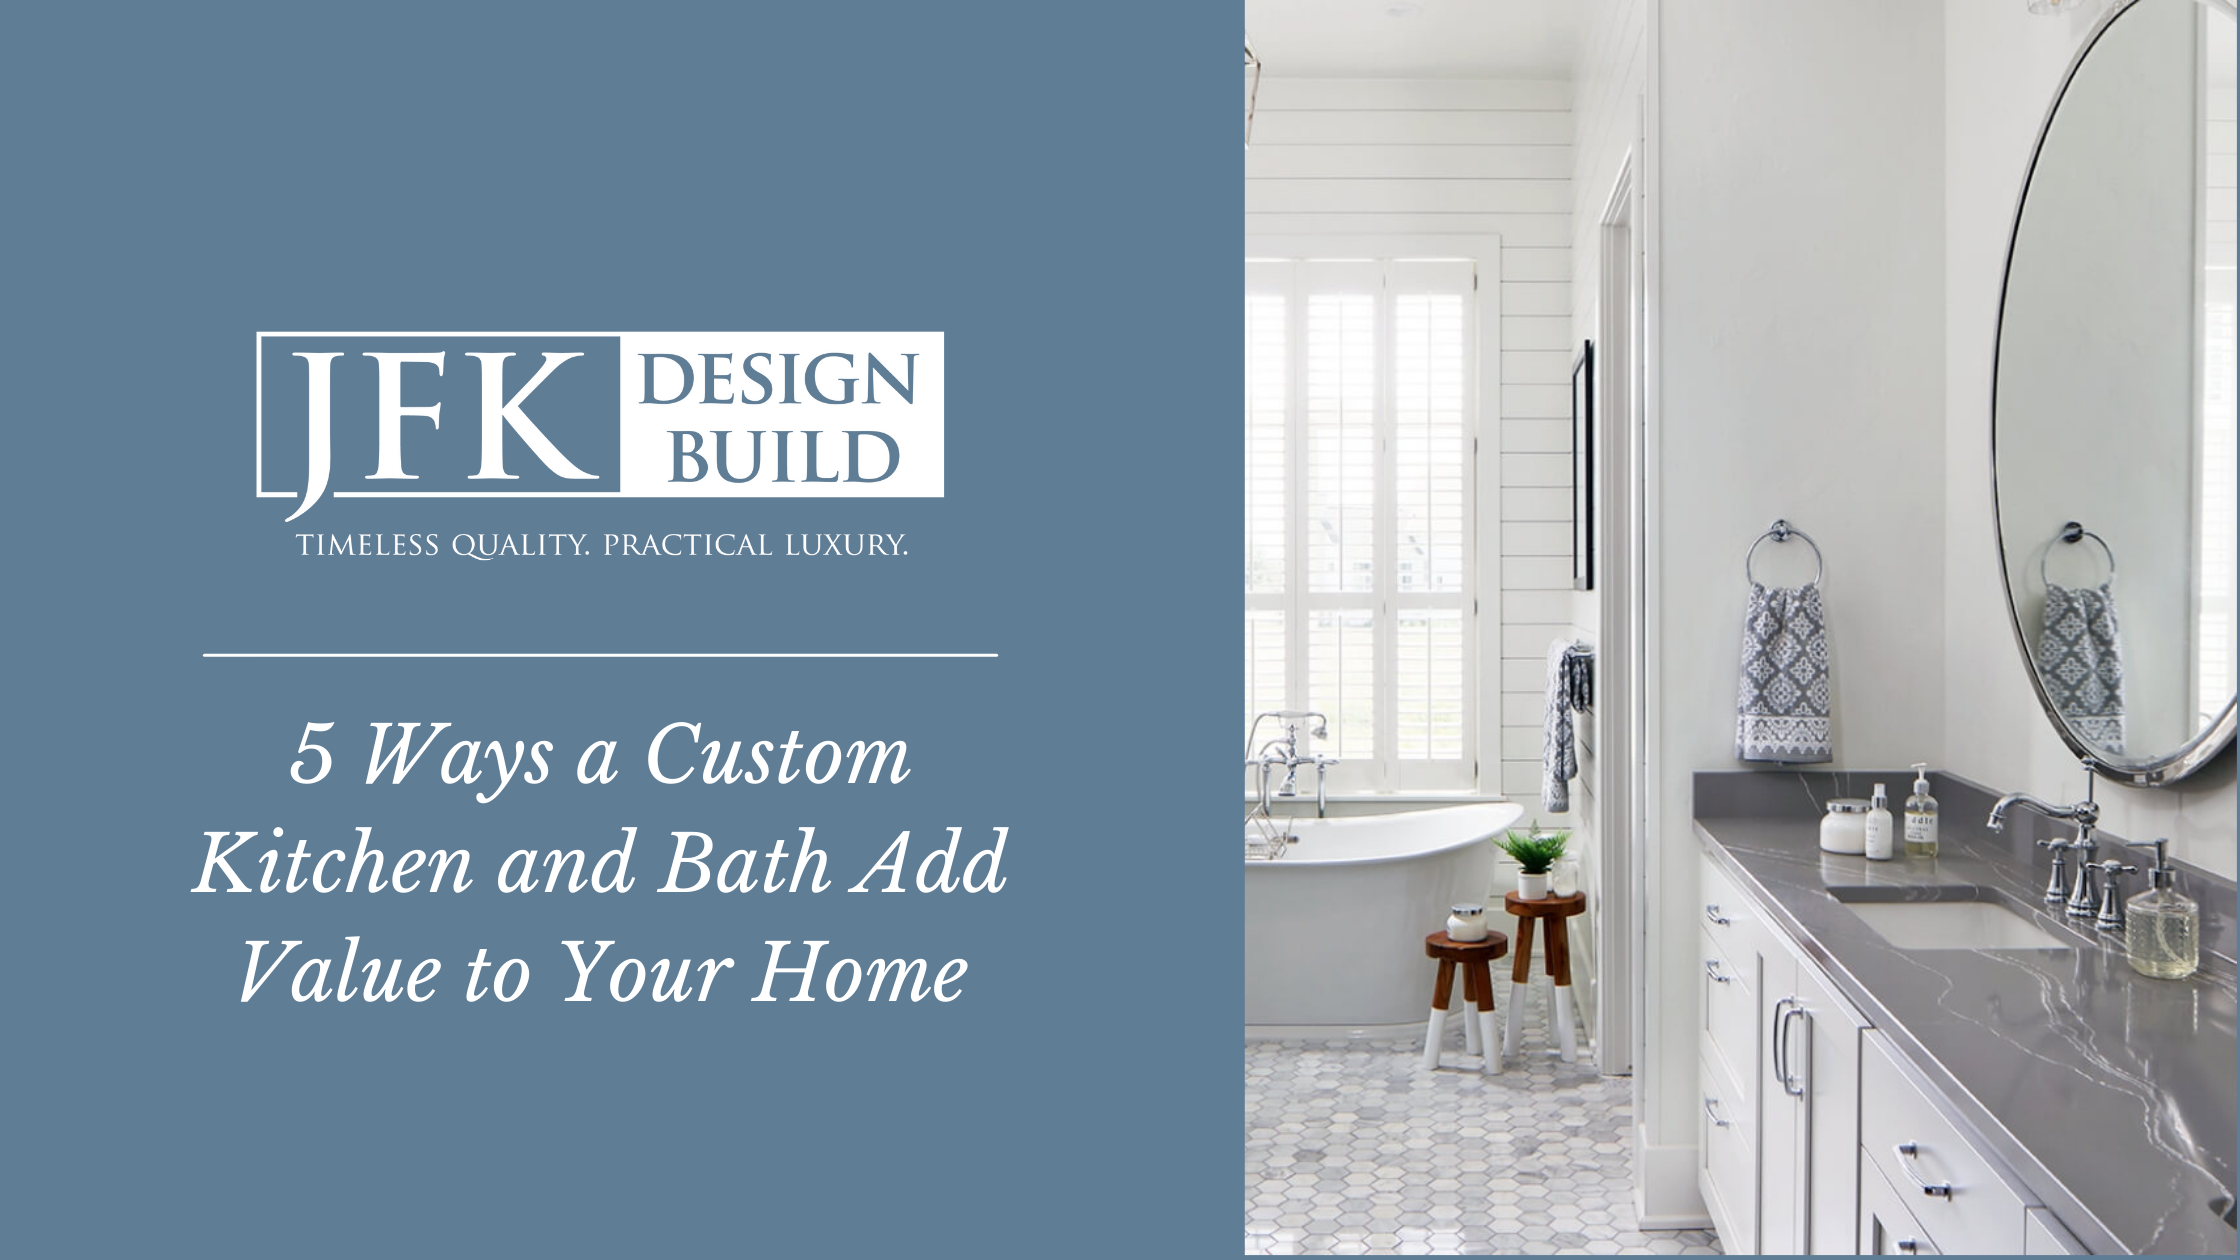 A photo of a bright white bathroom with custom features next to a blue block with white text "5 Ways a Custom Kitchen and Bath Add Value to Your Home" and a white JFK Design Build logo